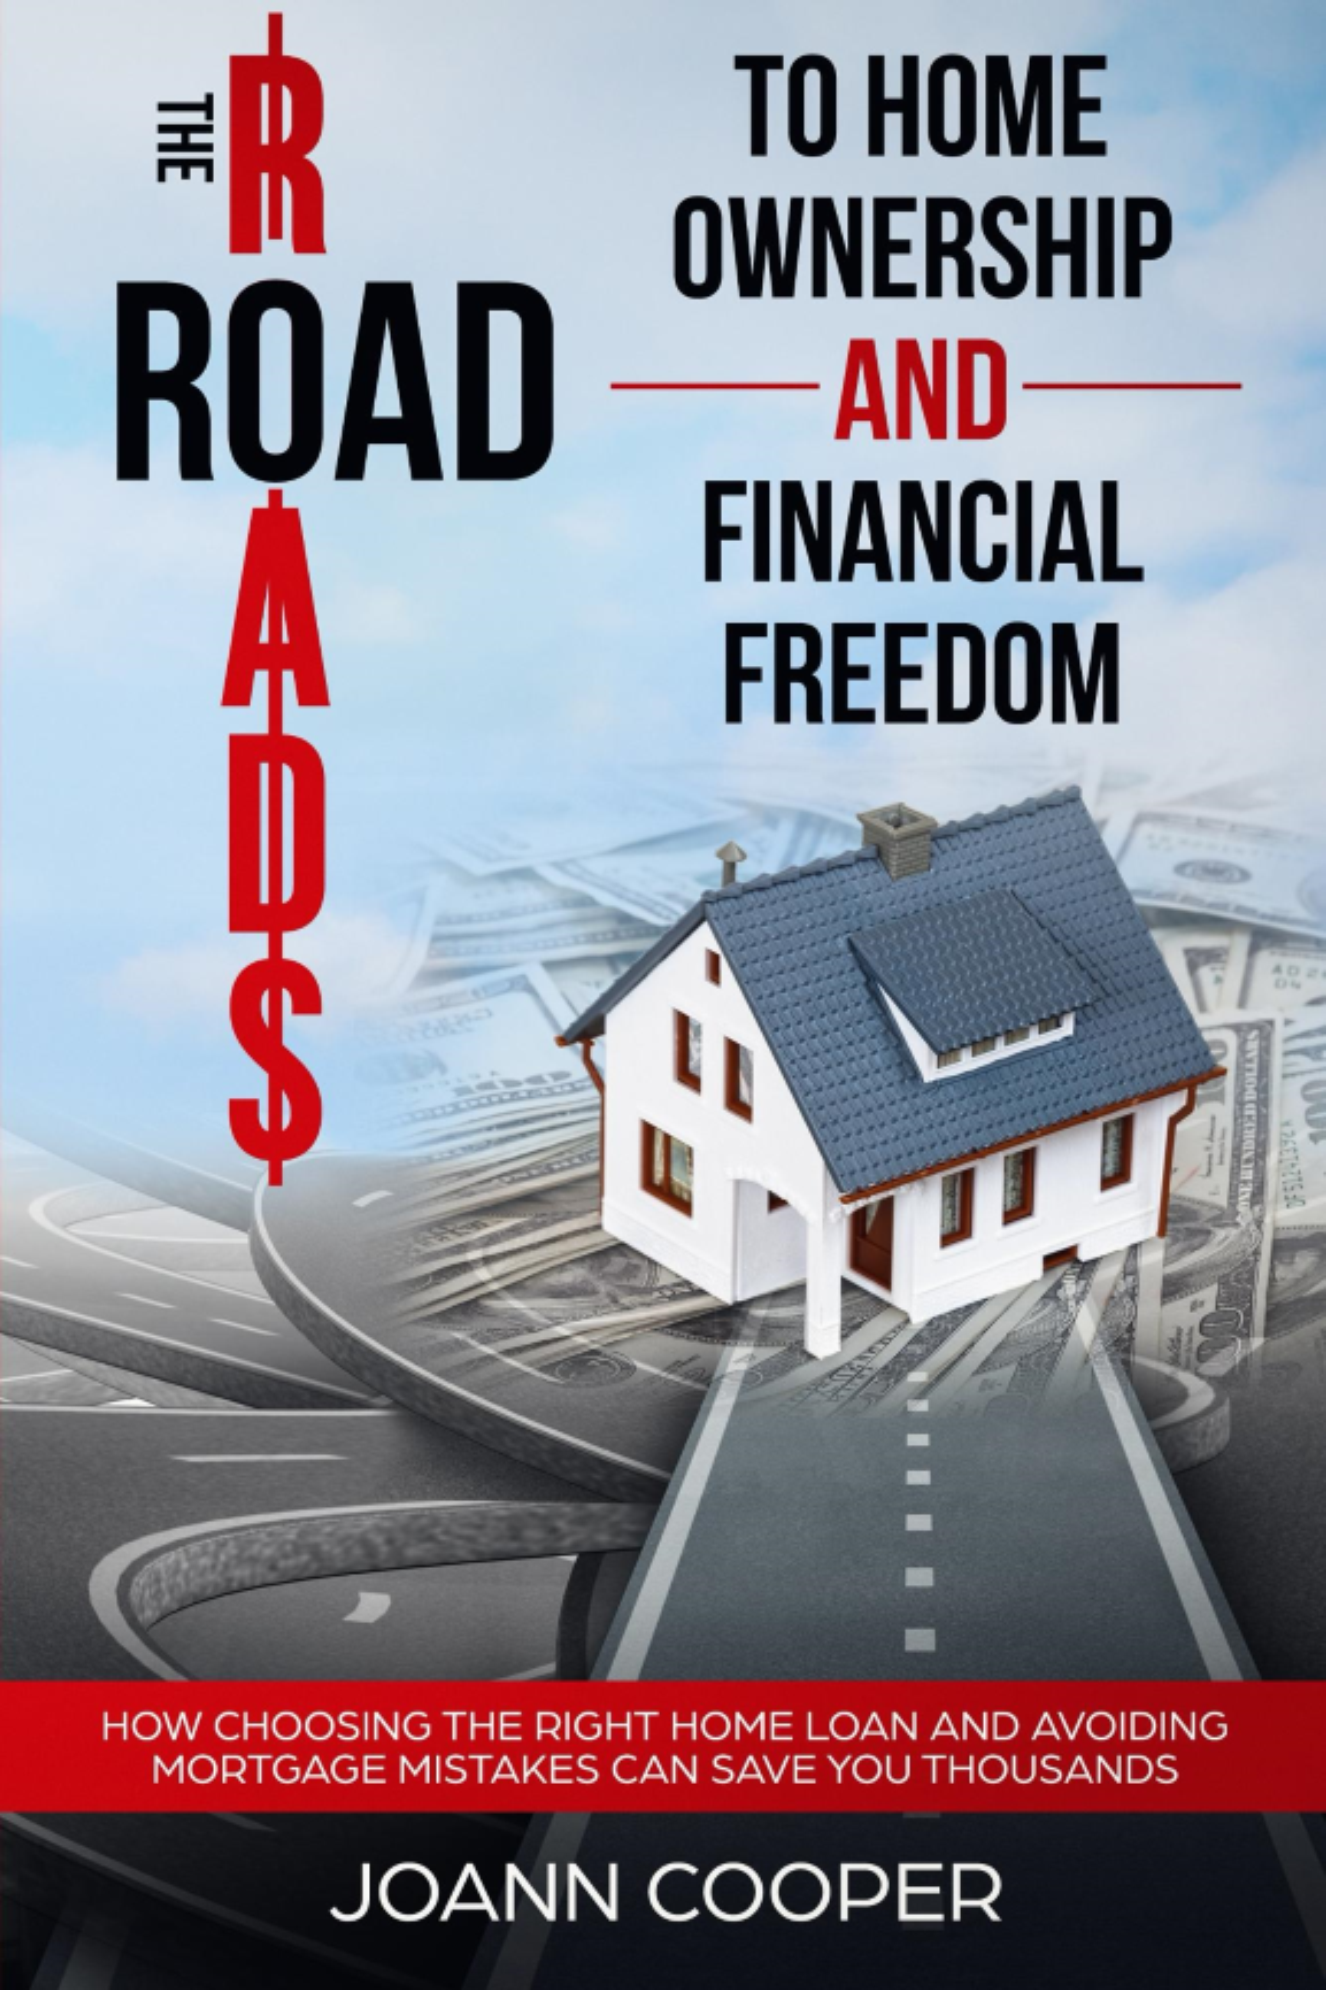 The Road to Home Ownership and Financial Freedom